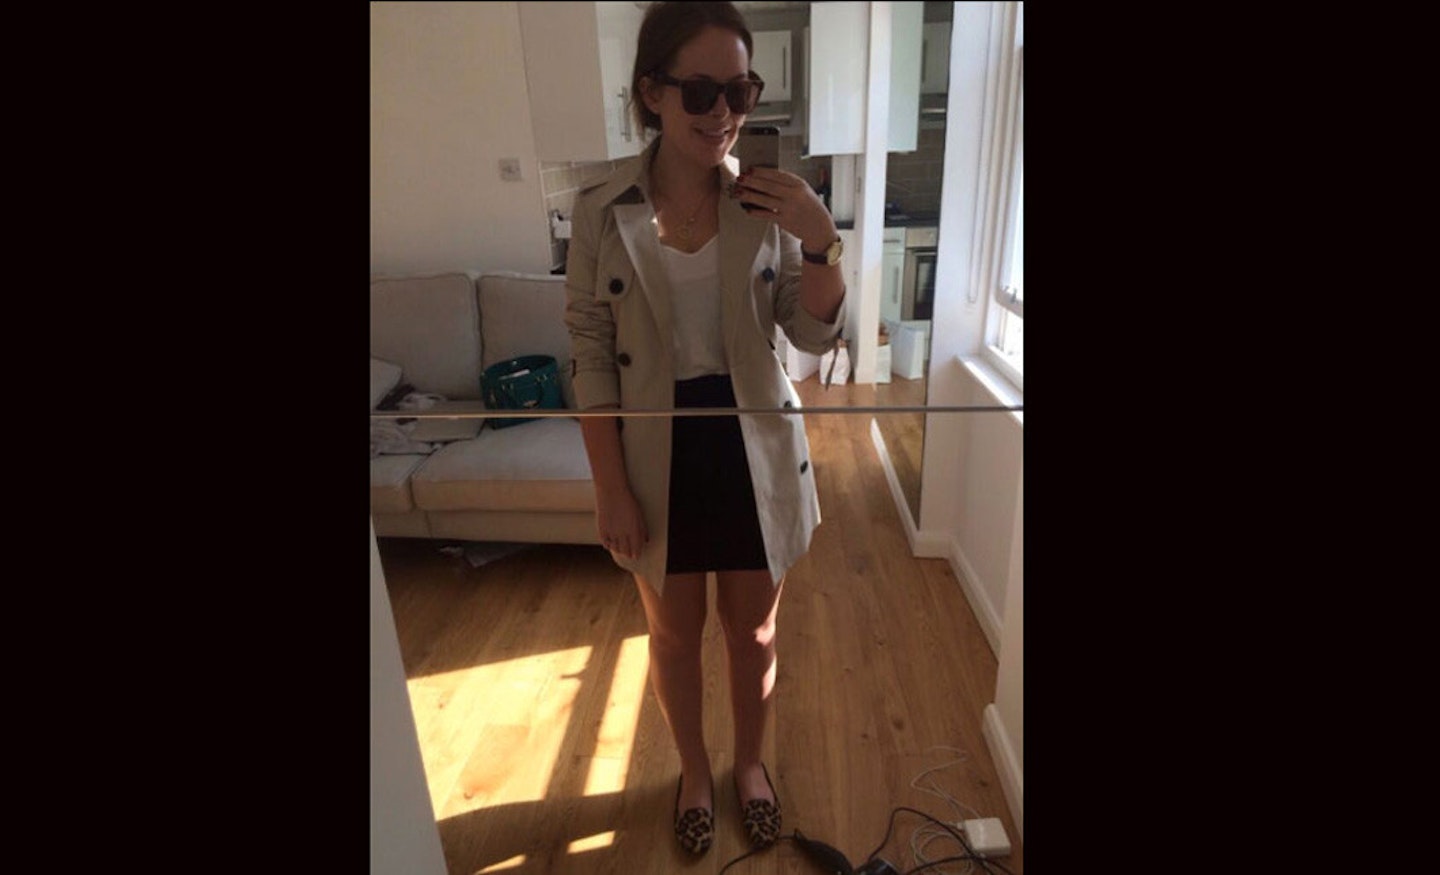 Now going for a lunch date with @JimsTweetings, here's my Emma Watson inspired outfit!